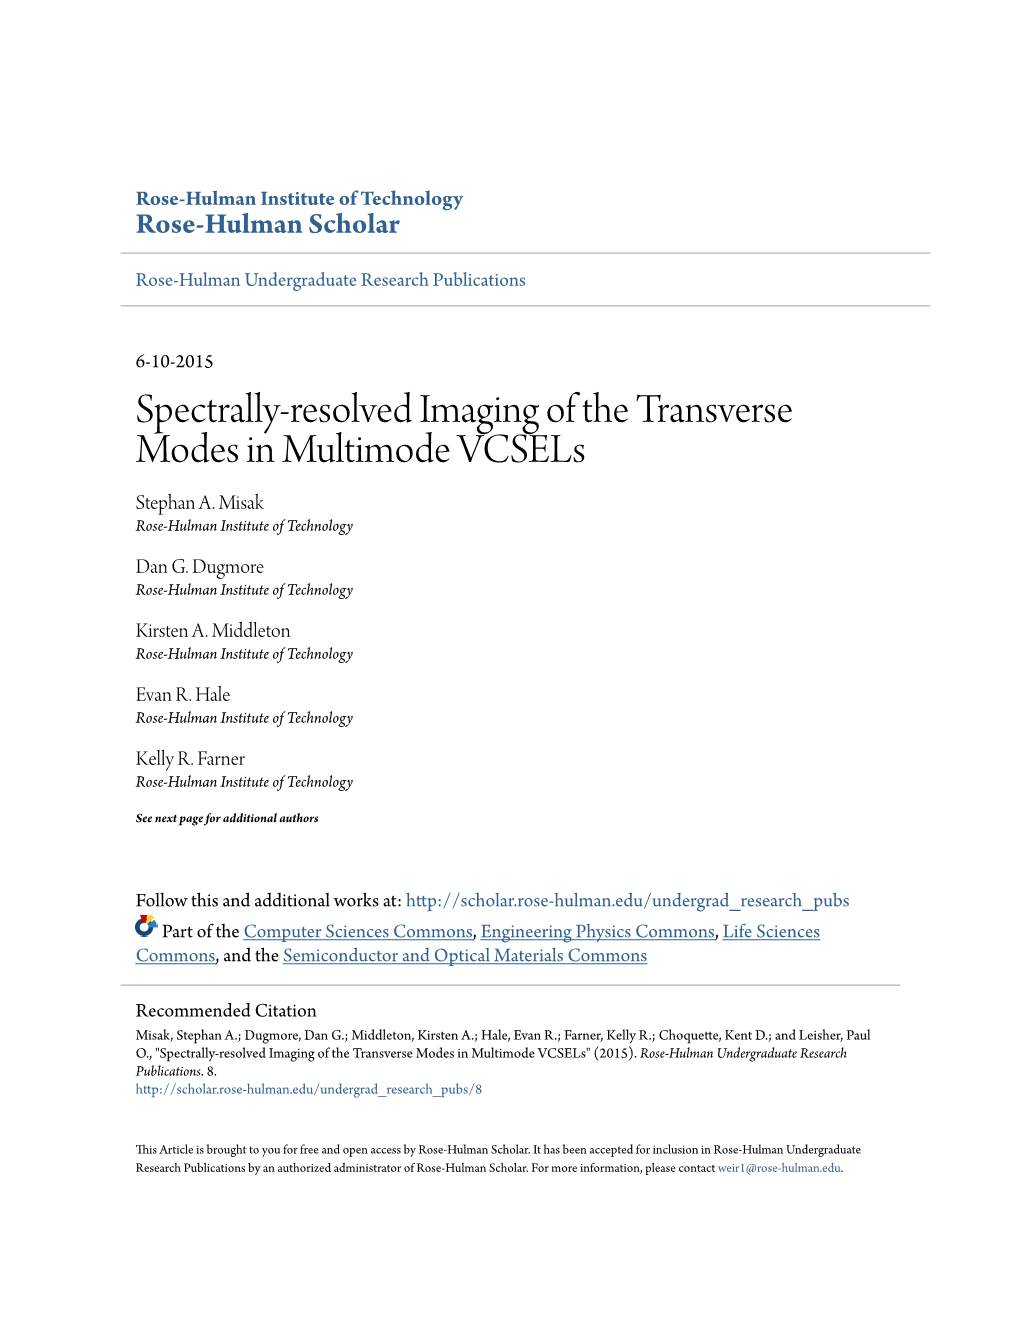 Spectrally-Resolved Imaging of the Transverse Modes in Multimode Vcsels Stephan A